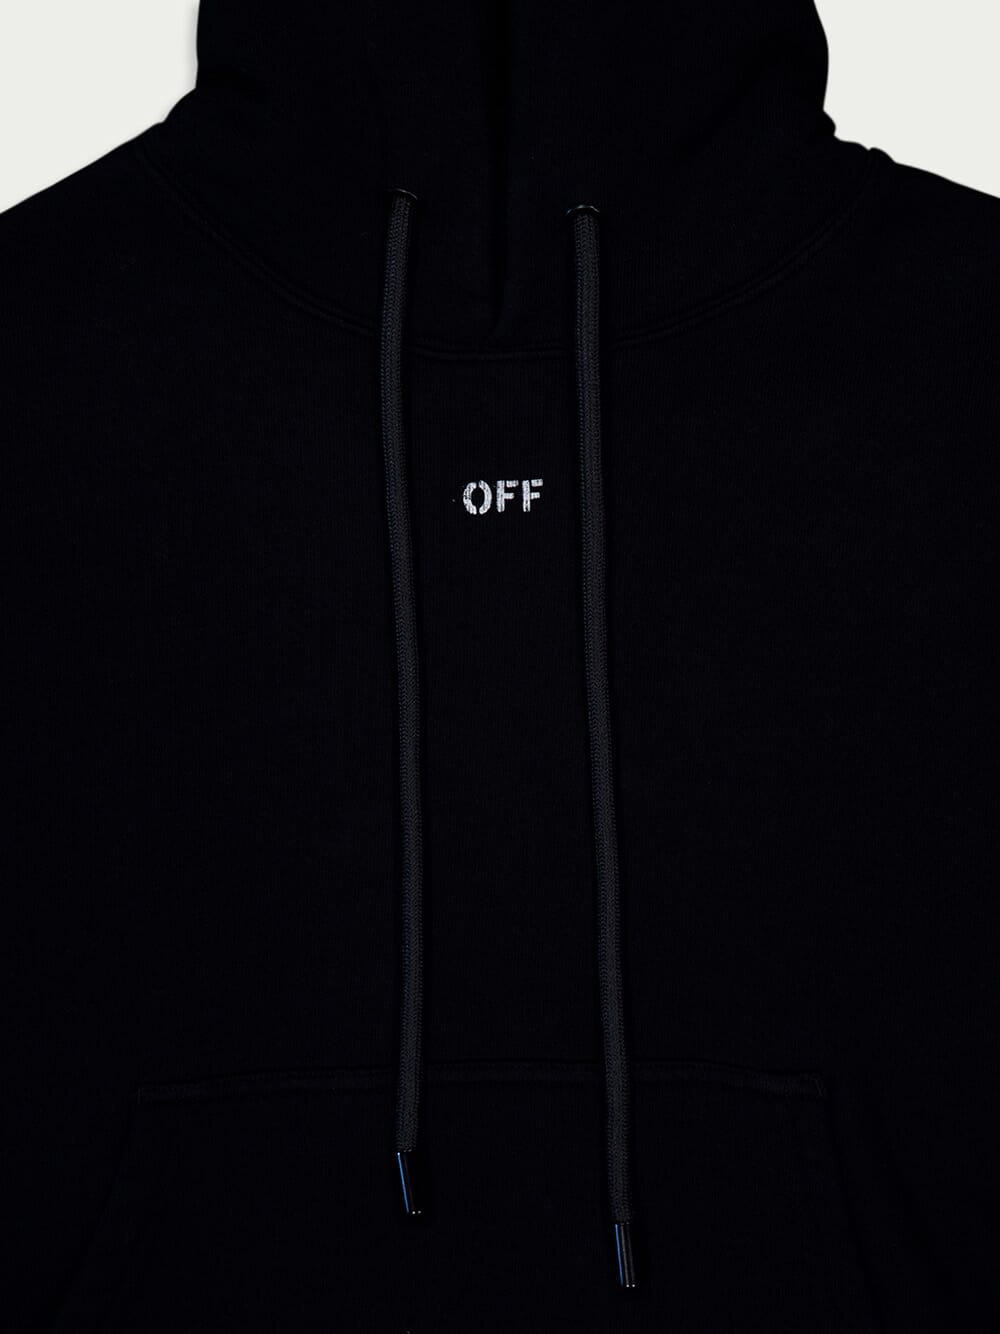 Off-WhiteOff Stamp Skate Hoodie at Fashion Clinic